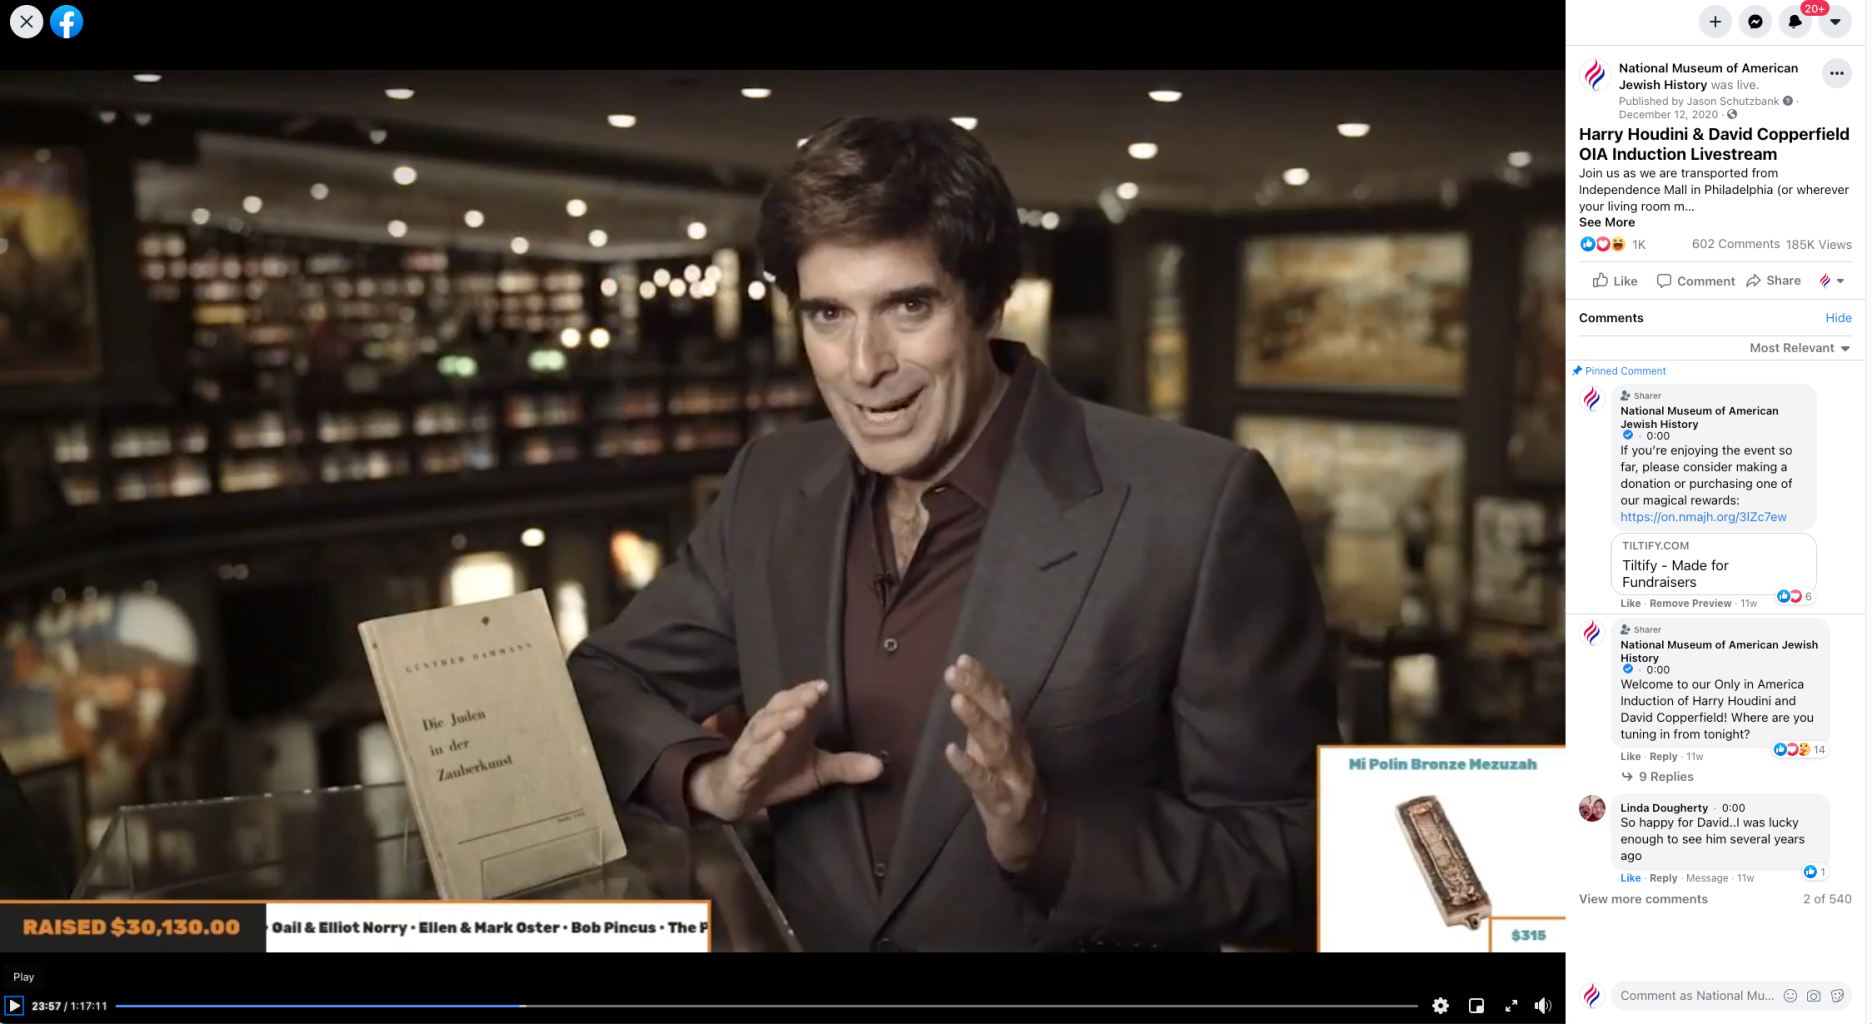 A screenshot of David Copperfield appearing at the fundraising gala via the museum's Facebook page